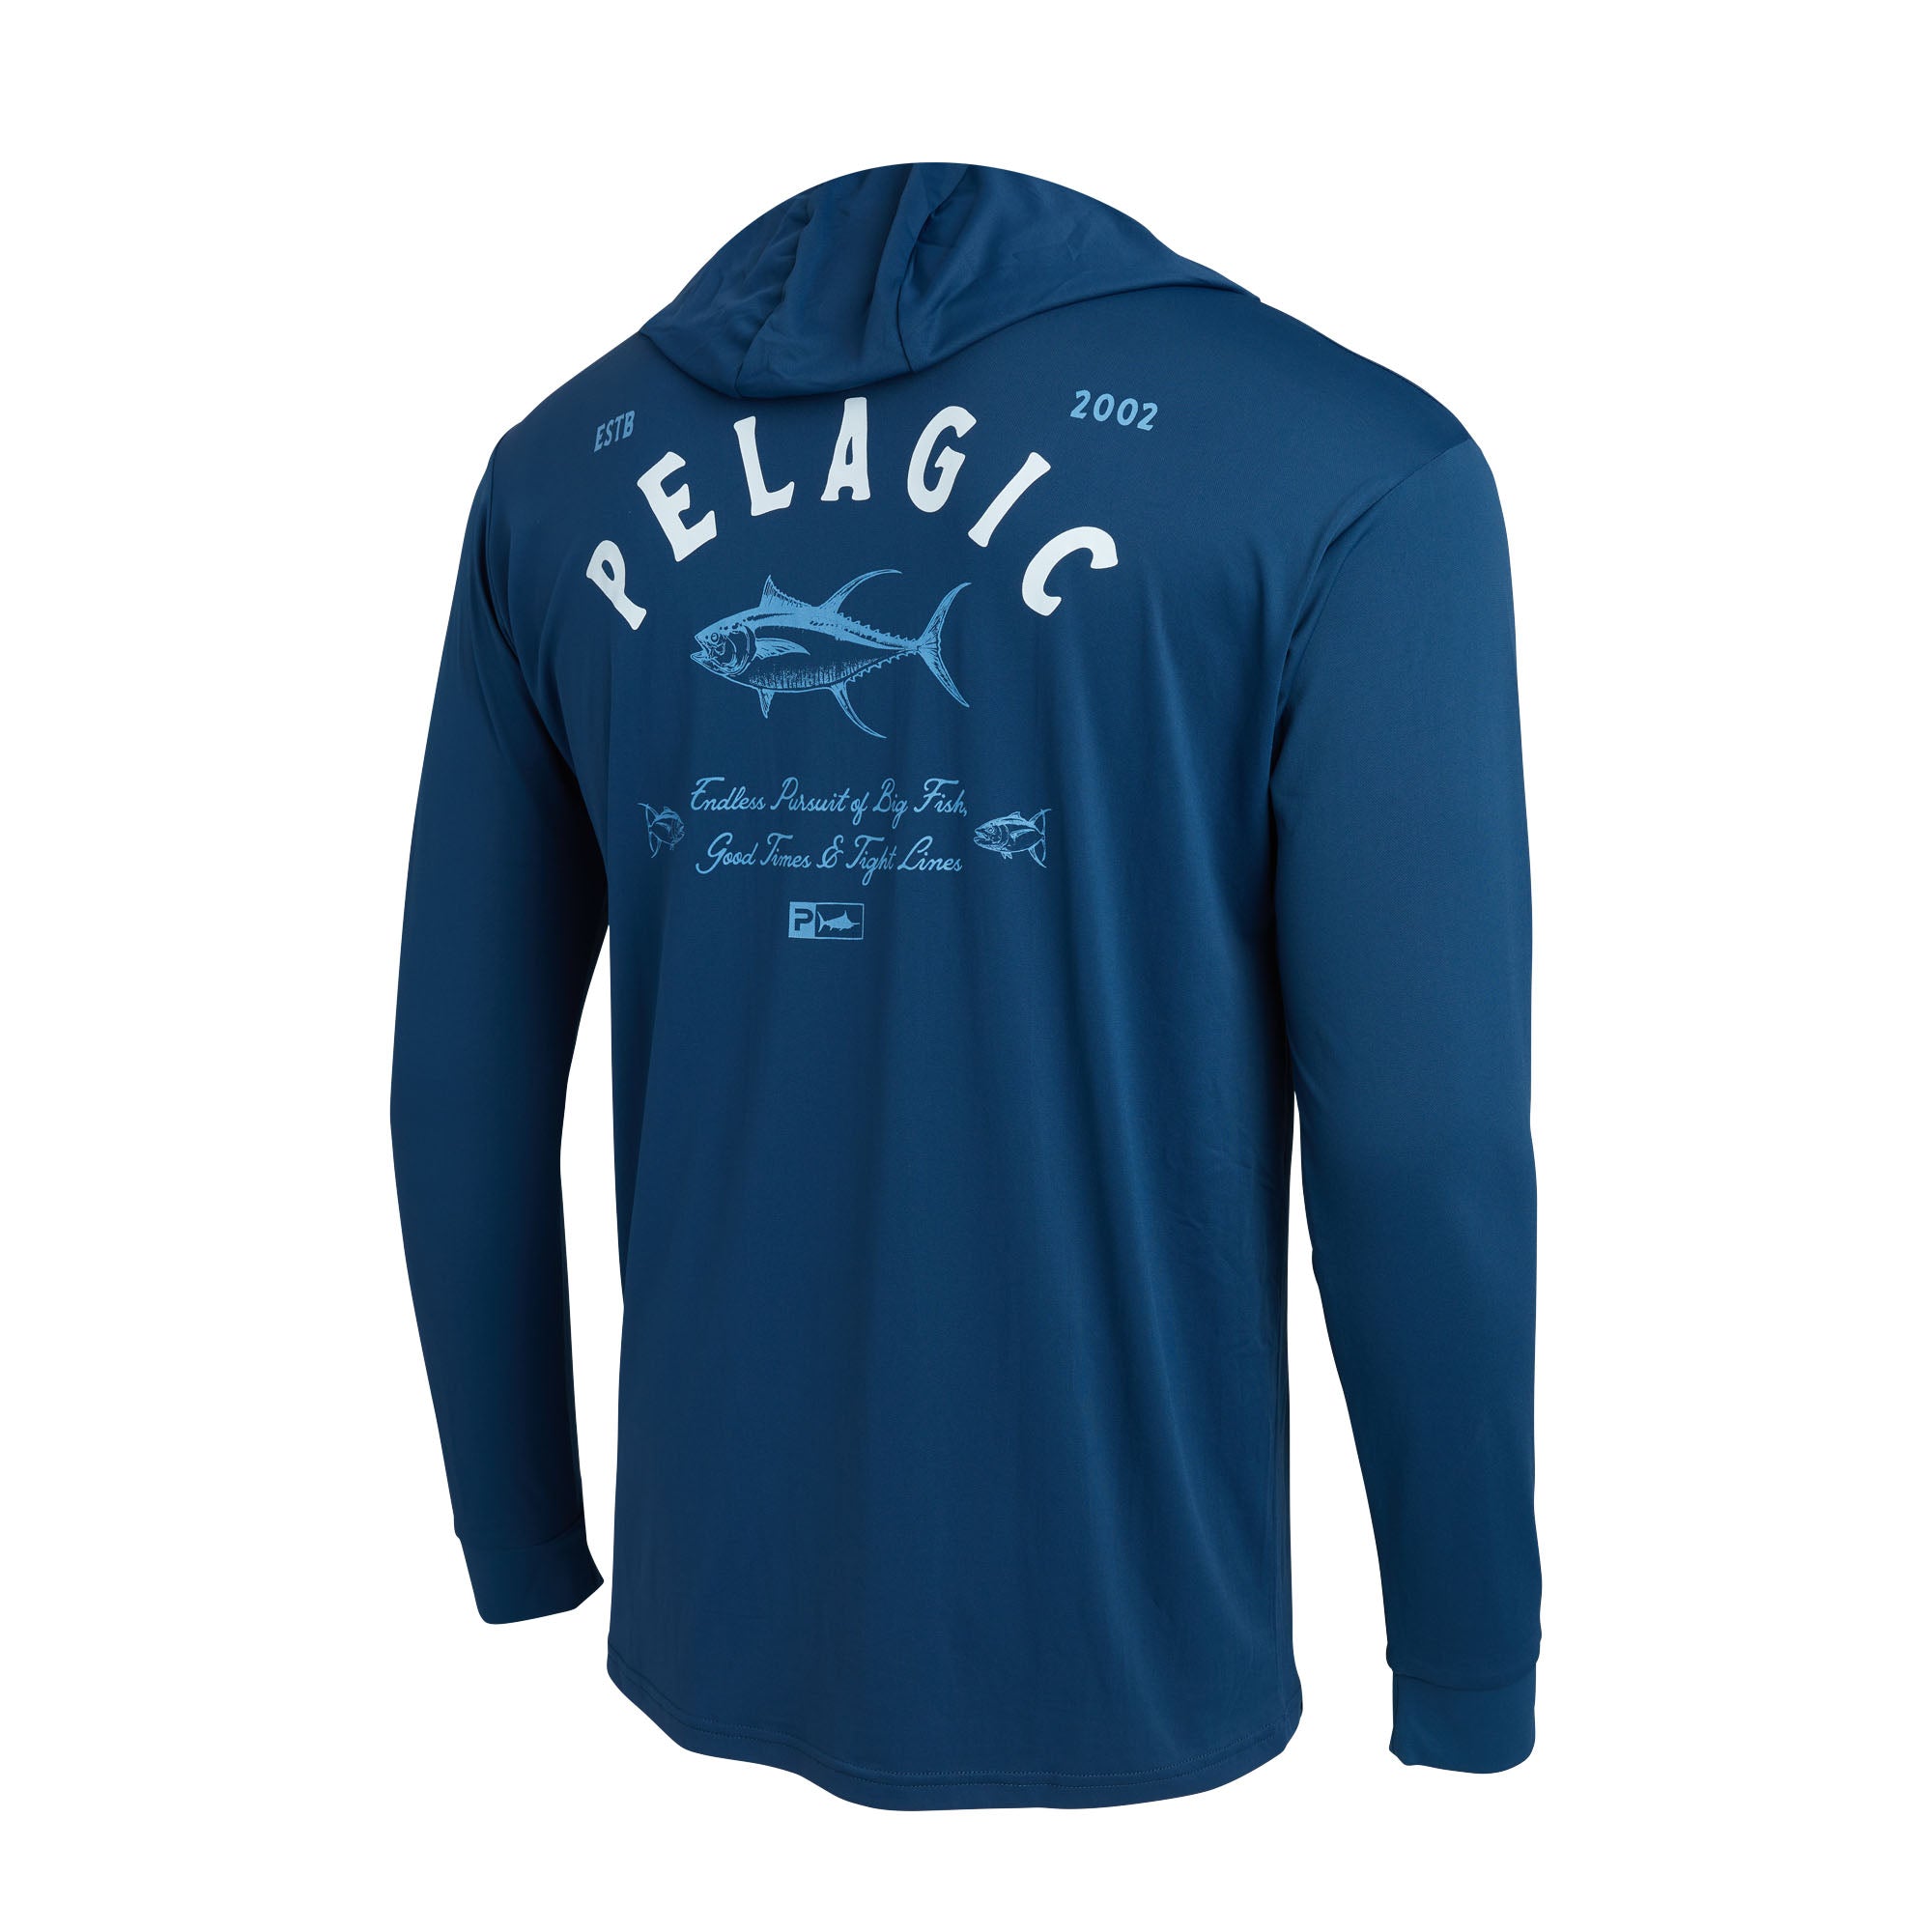 PELAGIC Women's Ultratek Icon Hooded Fishing Shirt, Long Sleeve, UPF 50+  Protection, Water and Stain Repellent, Ultra Soft Feel